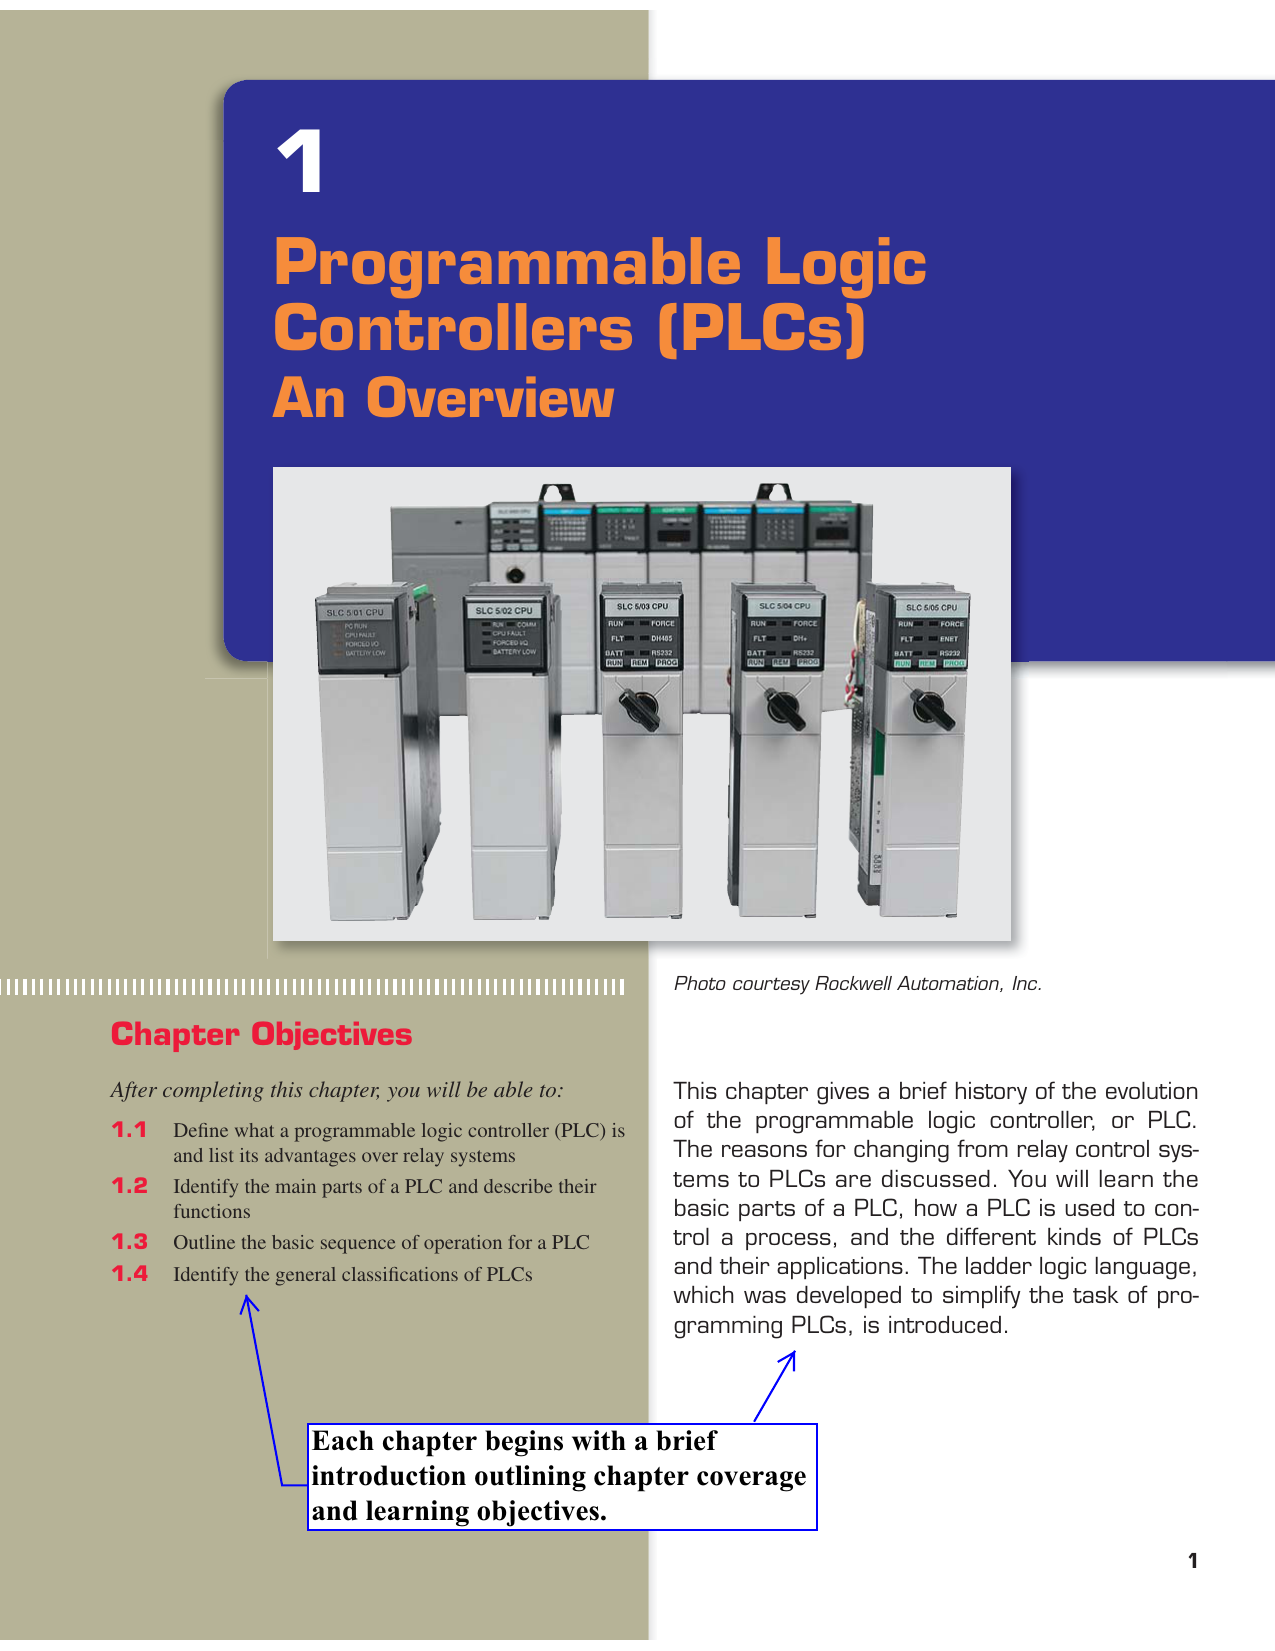 design a ladder logic program that counts parts and their values. input i:2/1 is a sensor